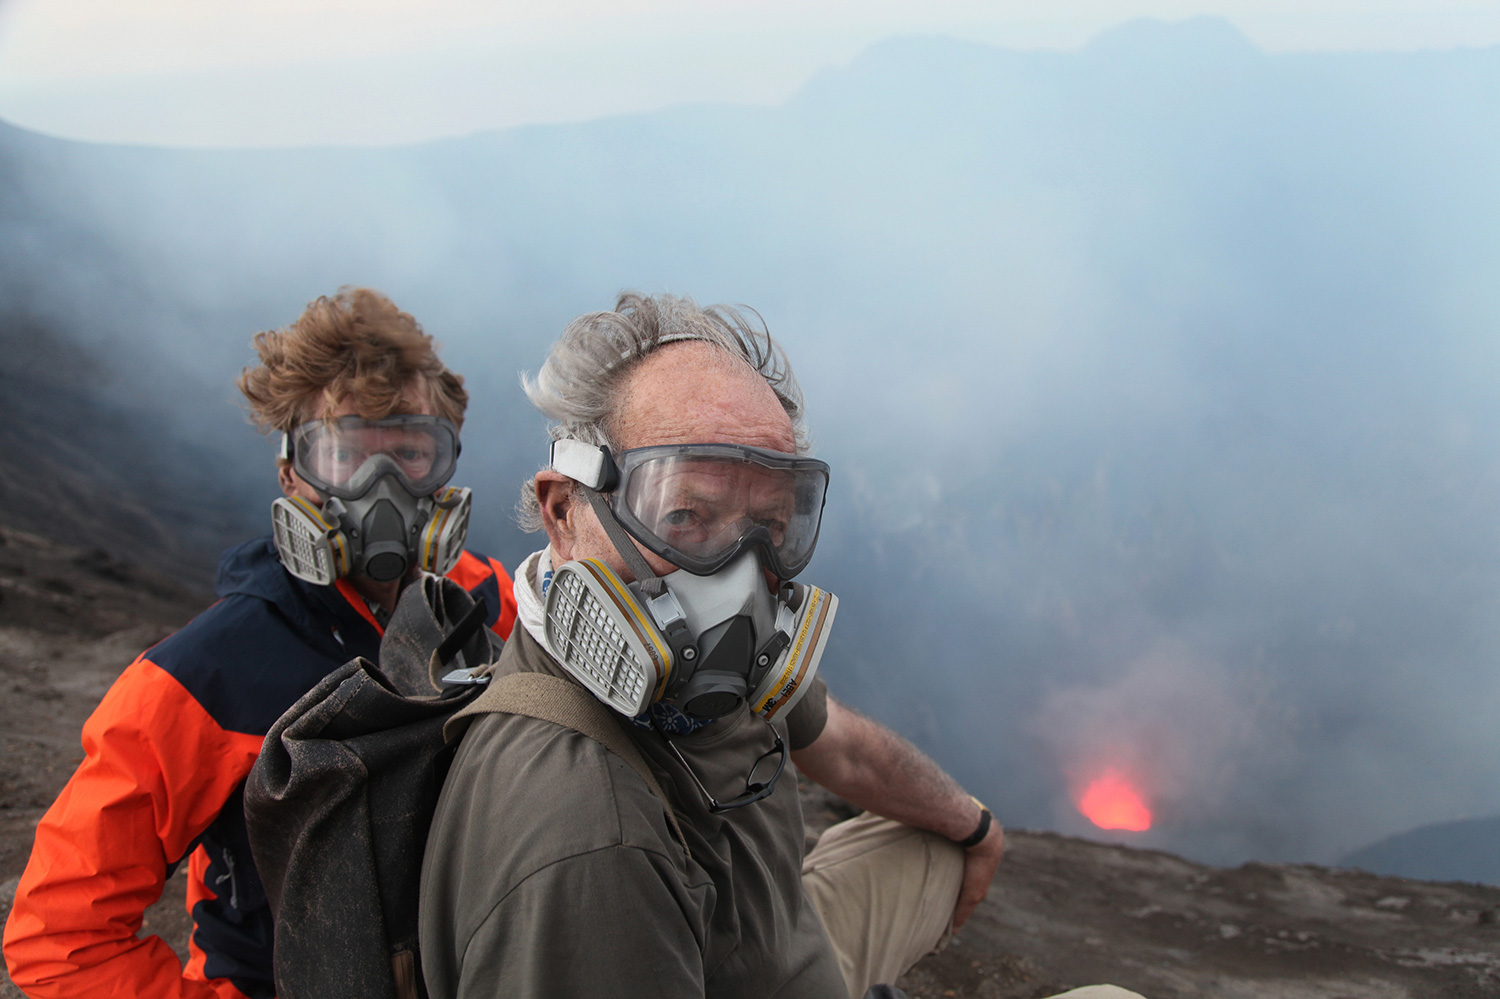 Volcanologist Clive Oppenheimer (left) with filmmaker Werner Herzog in Indonesia during the making of Herzog's 'Into the Inferno,' on location in Indonesia. Courtesy of Netflix